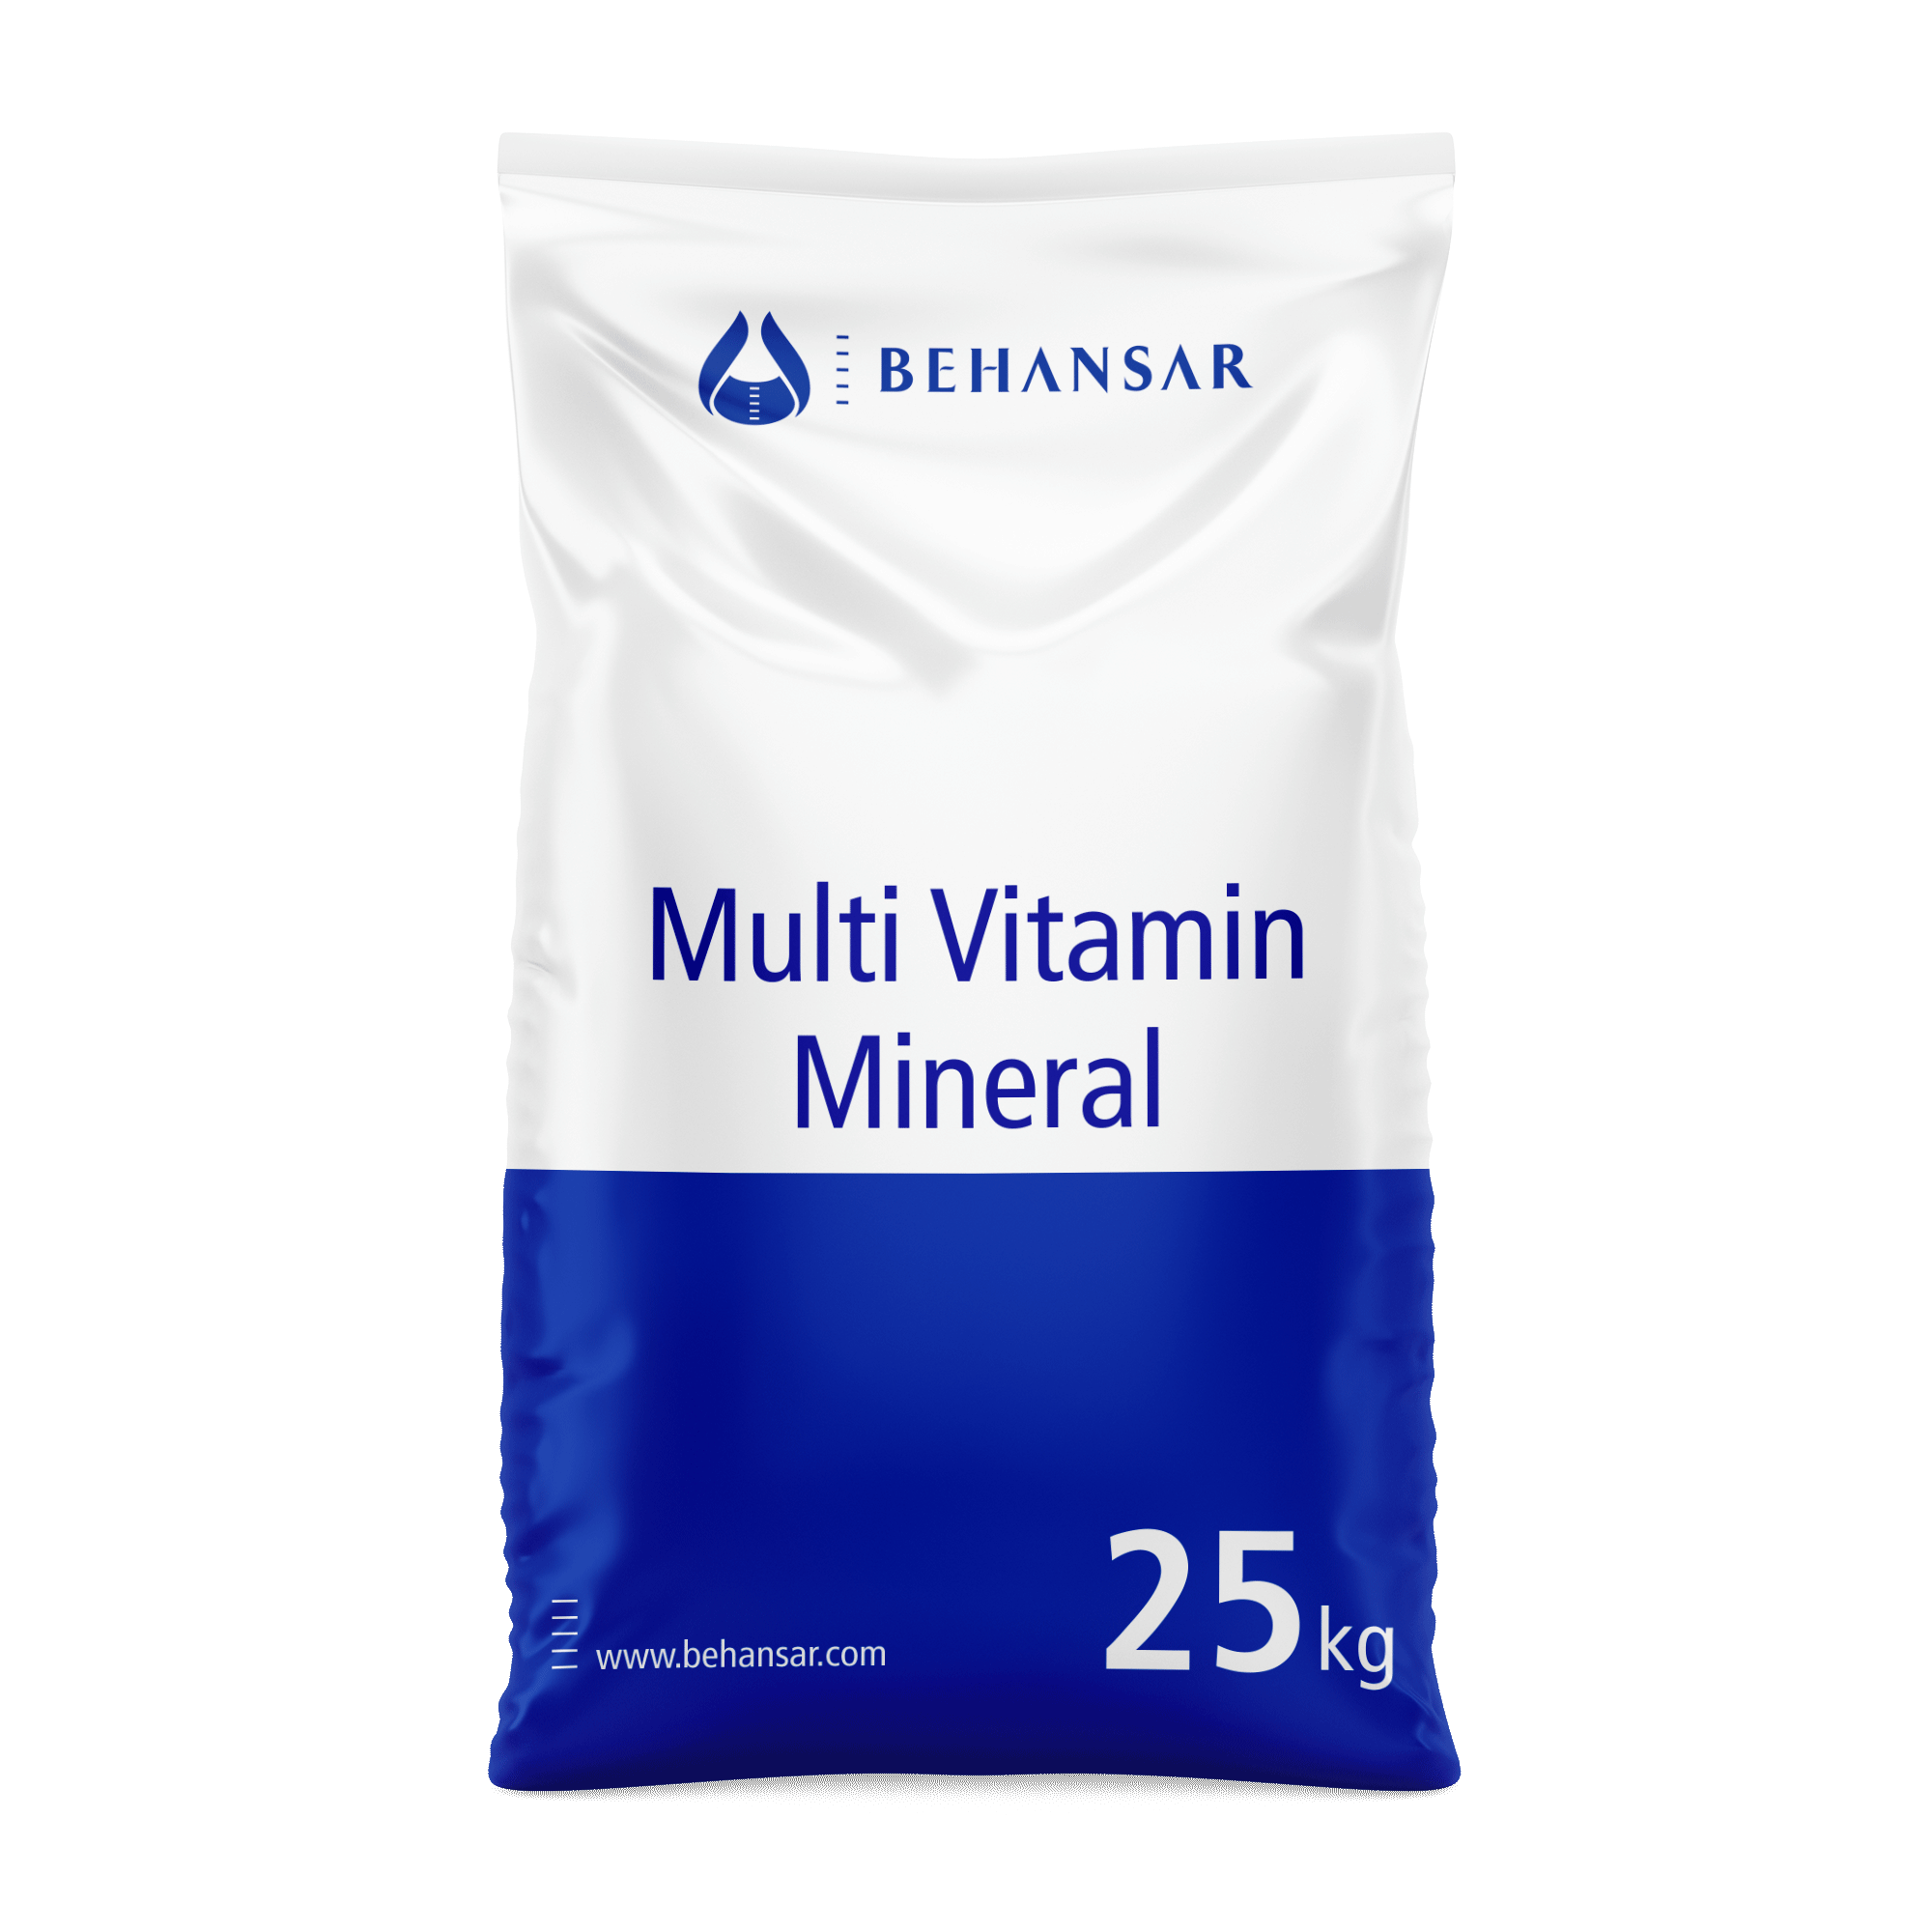 Multi Vitamin Mineral is one of the products of Behansar Co